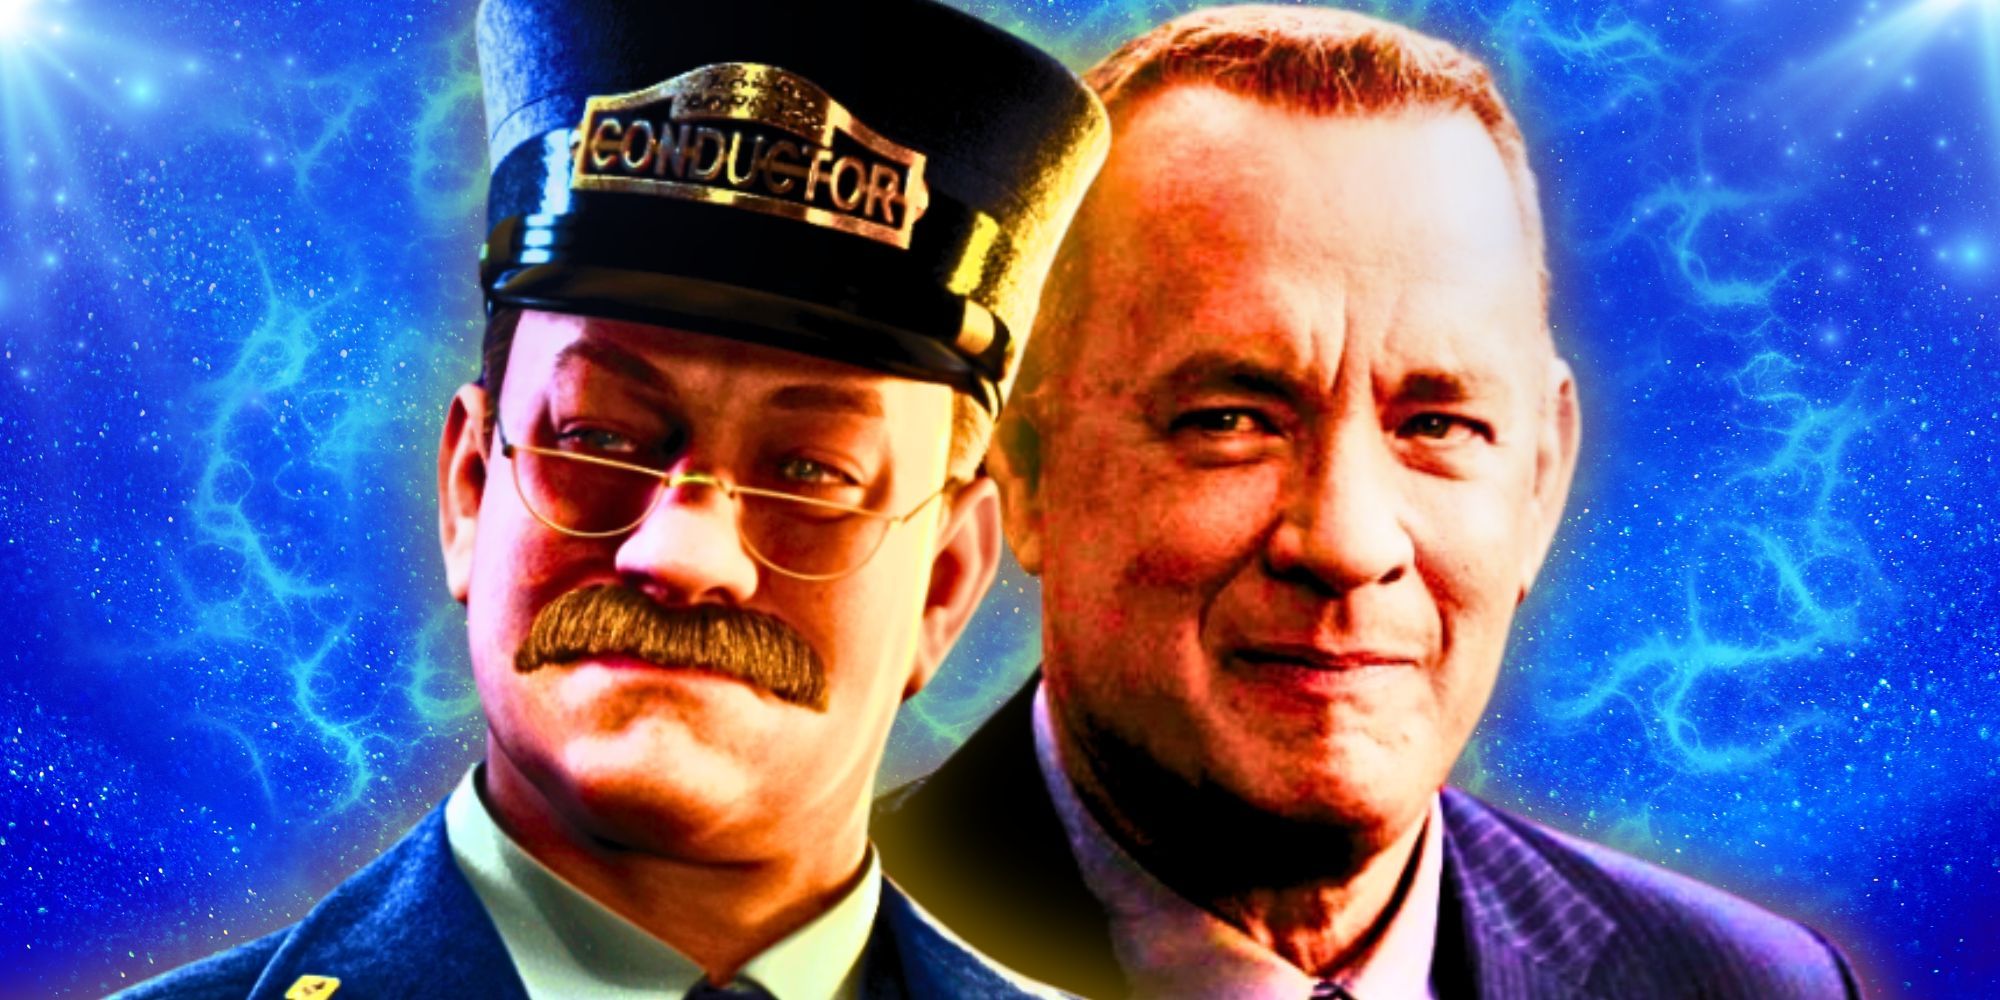 Tom Hanks next to the animated Conductor character in The Polar Express.